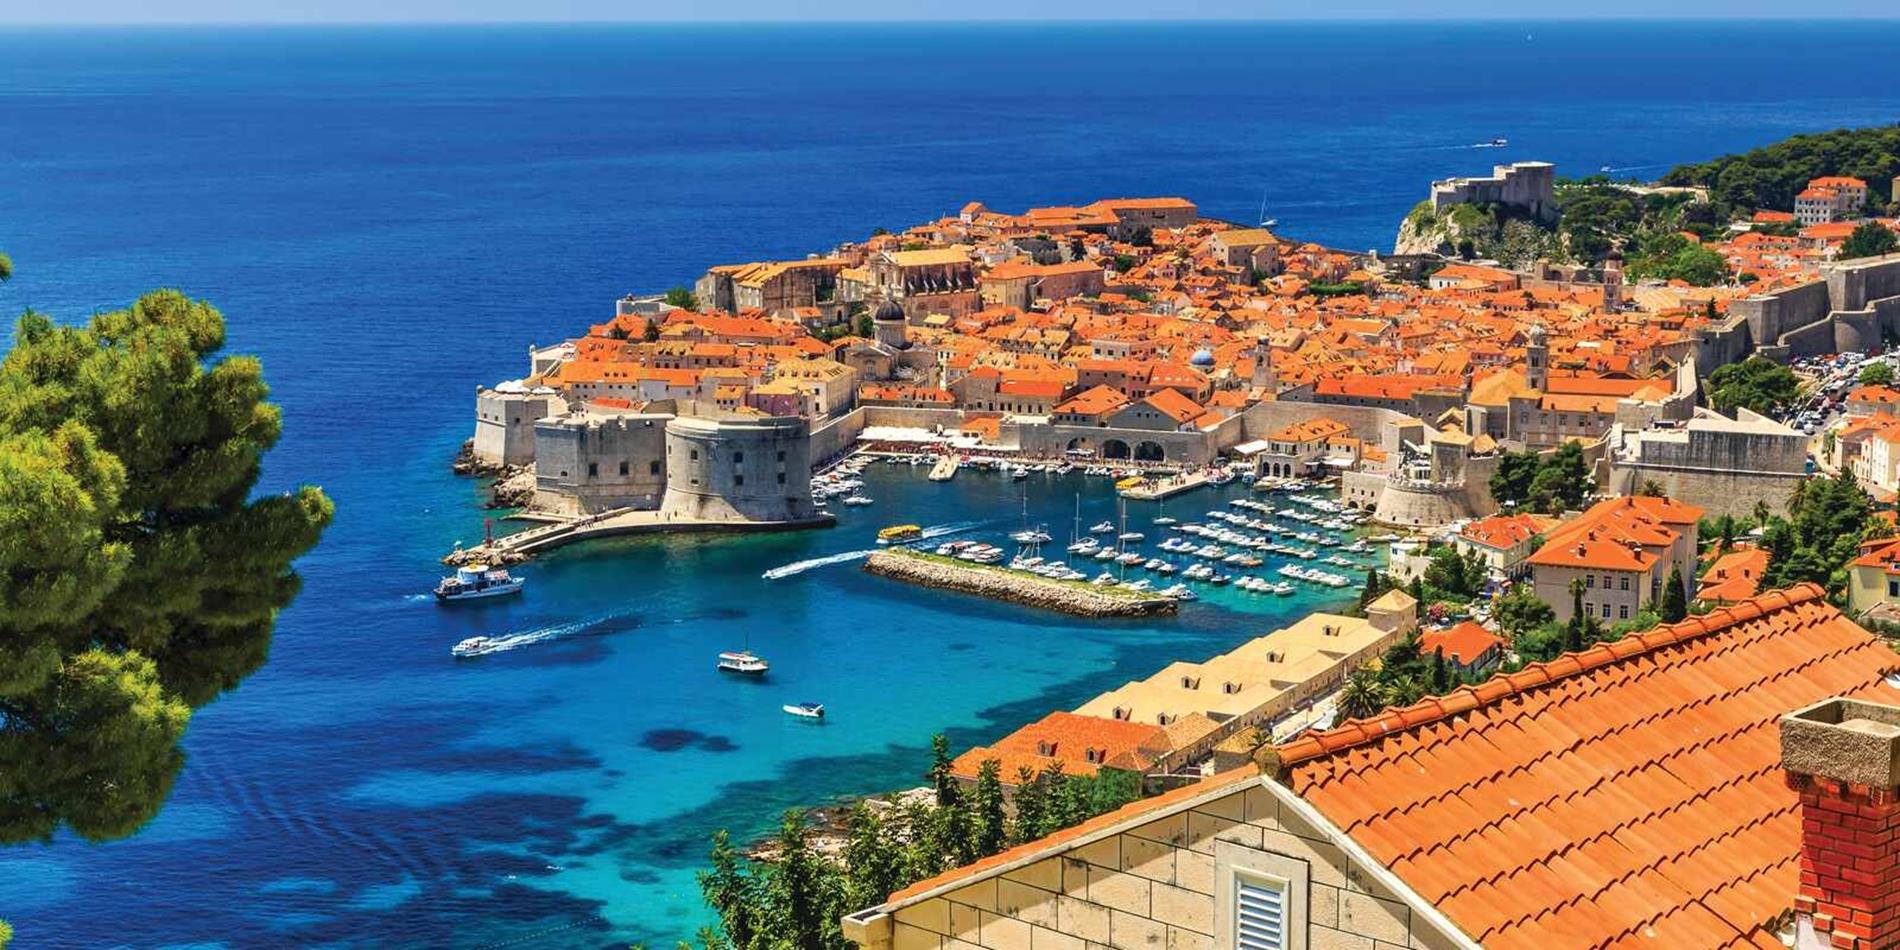 Aerial view of Dubrovnik's colourful Old Town in Croatia